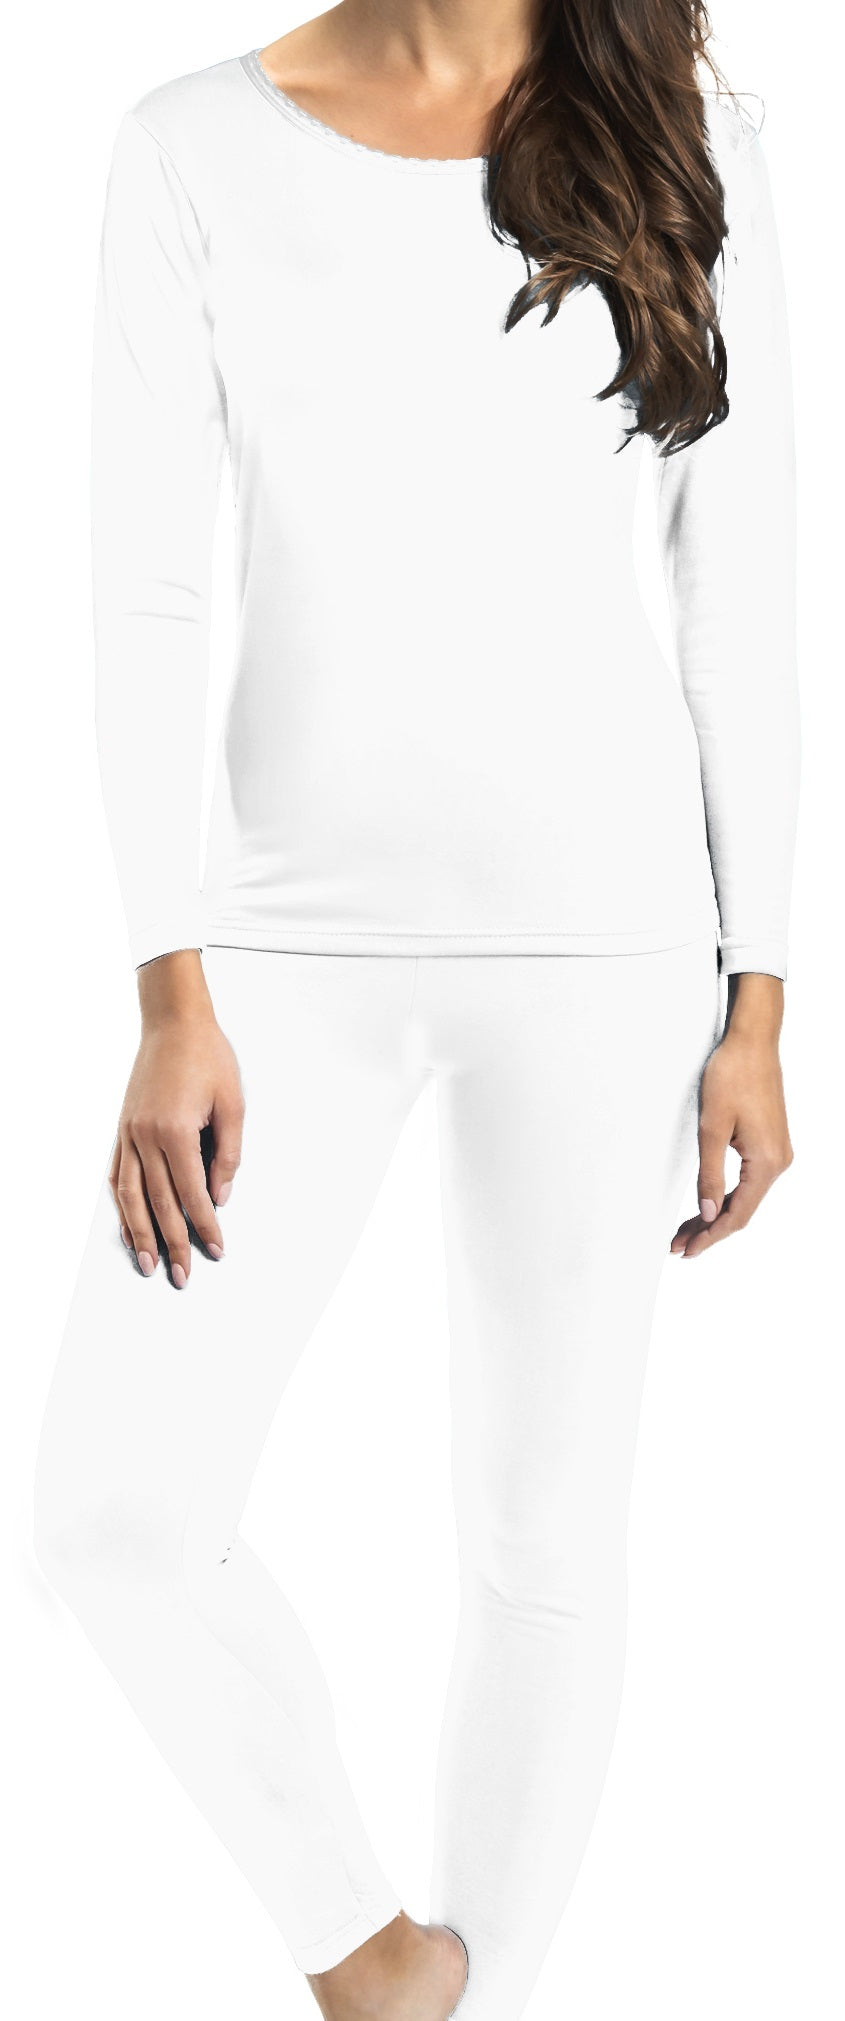 Buy Rocky Thermal Underwear for Girls (Thermal Long Johns Set